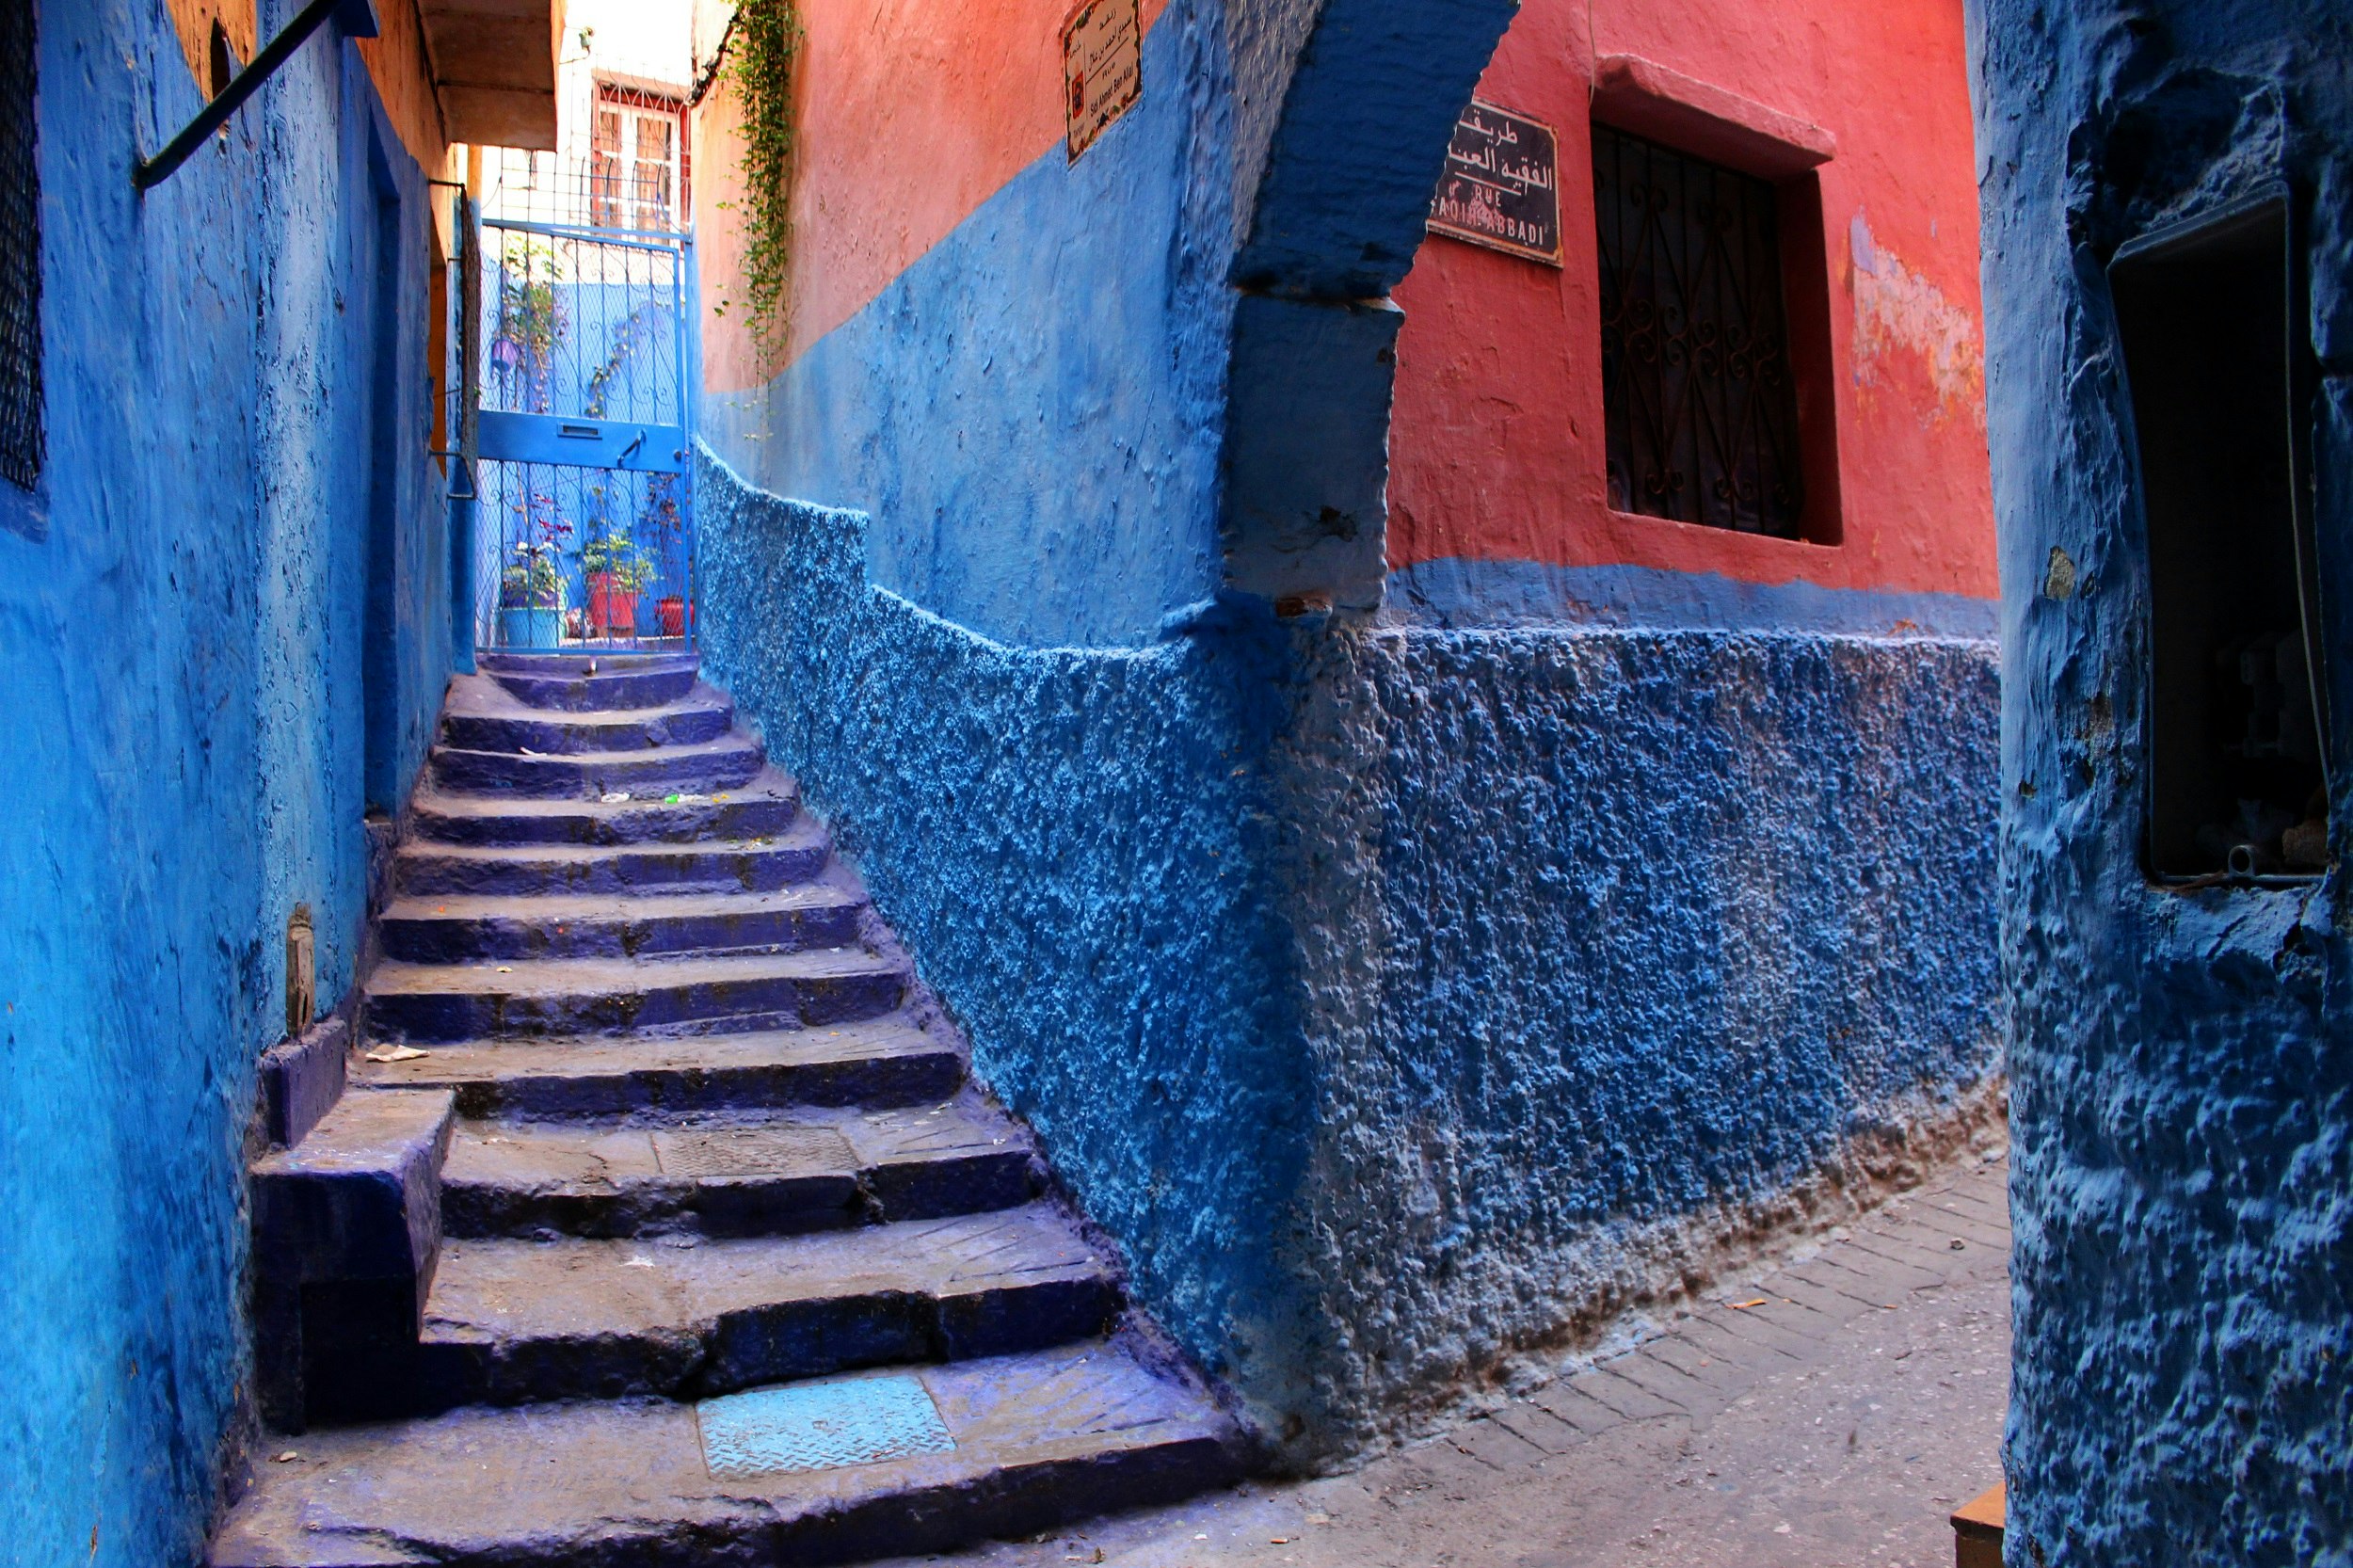 This images looks up some empty steps in an atmospheric alley in Tangiers; the lower walls are a bright blue, while the upper sections are a vibrant salmon colour.